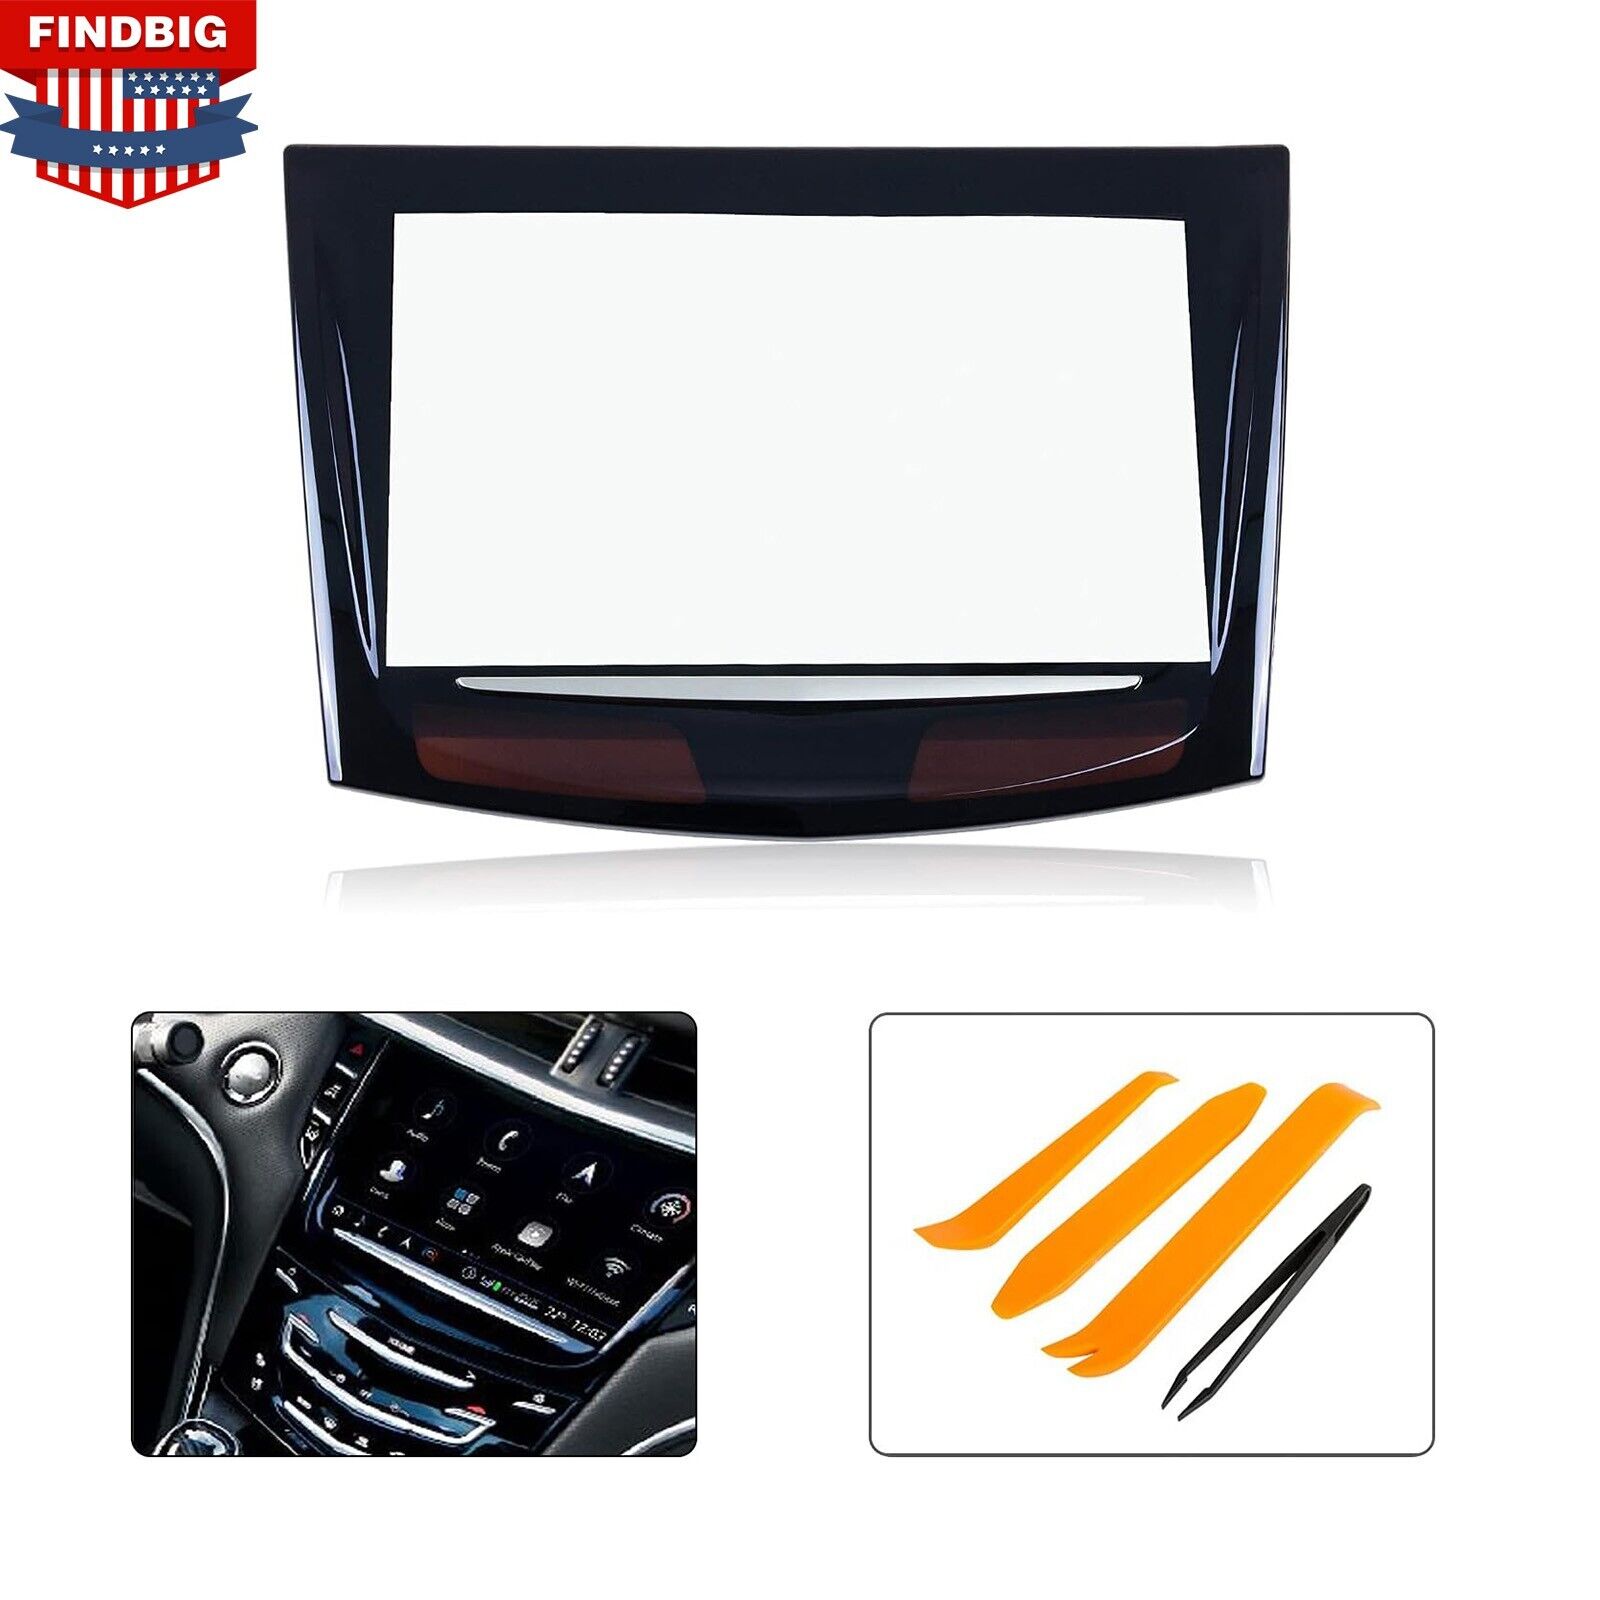 Touch Screen Display for 2018-2021 Cadillac Escalade ATS CTS XTS CUE TouchSense